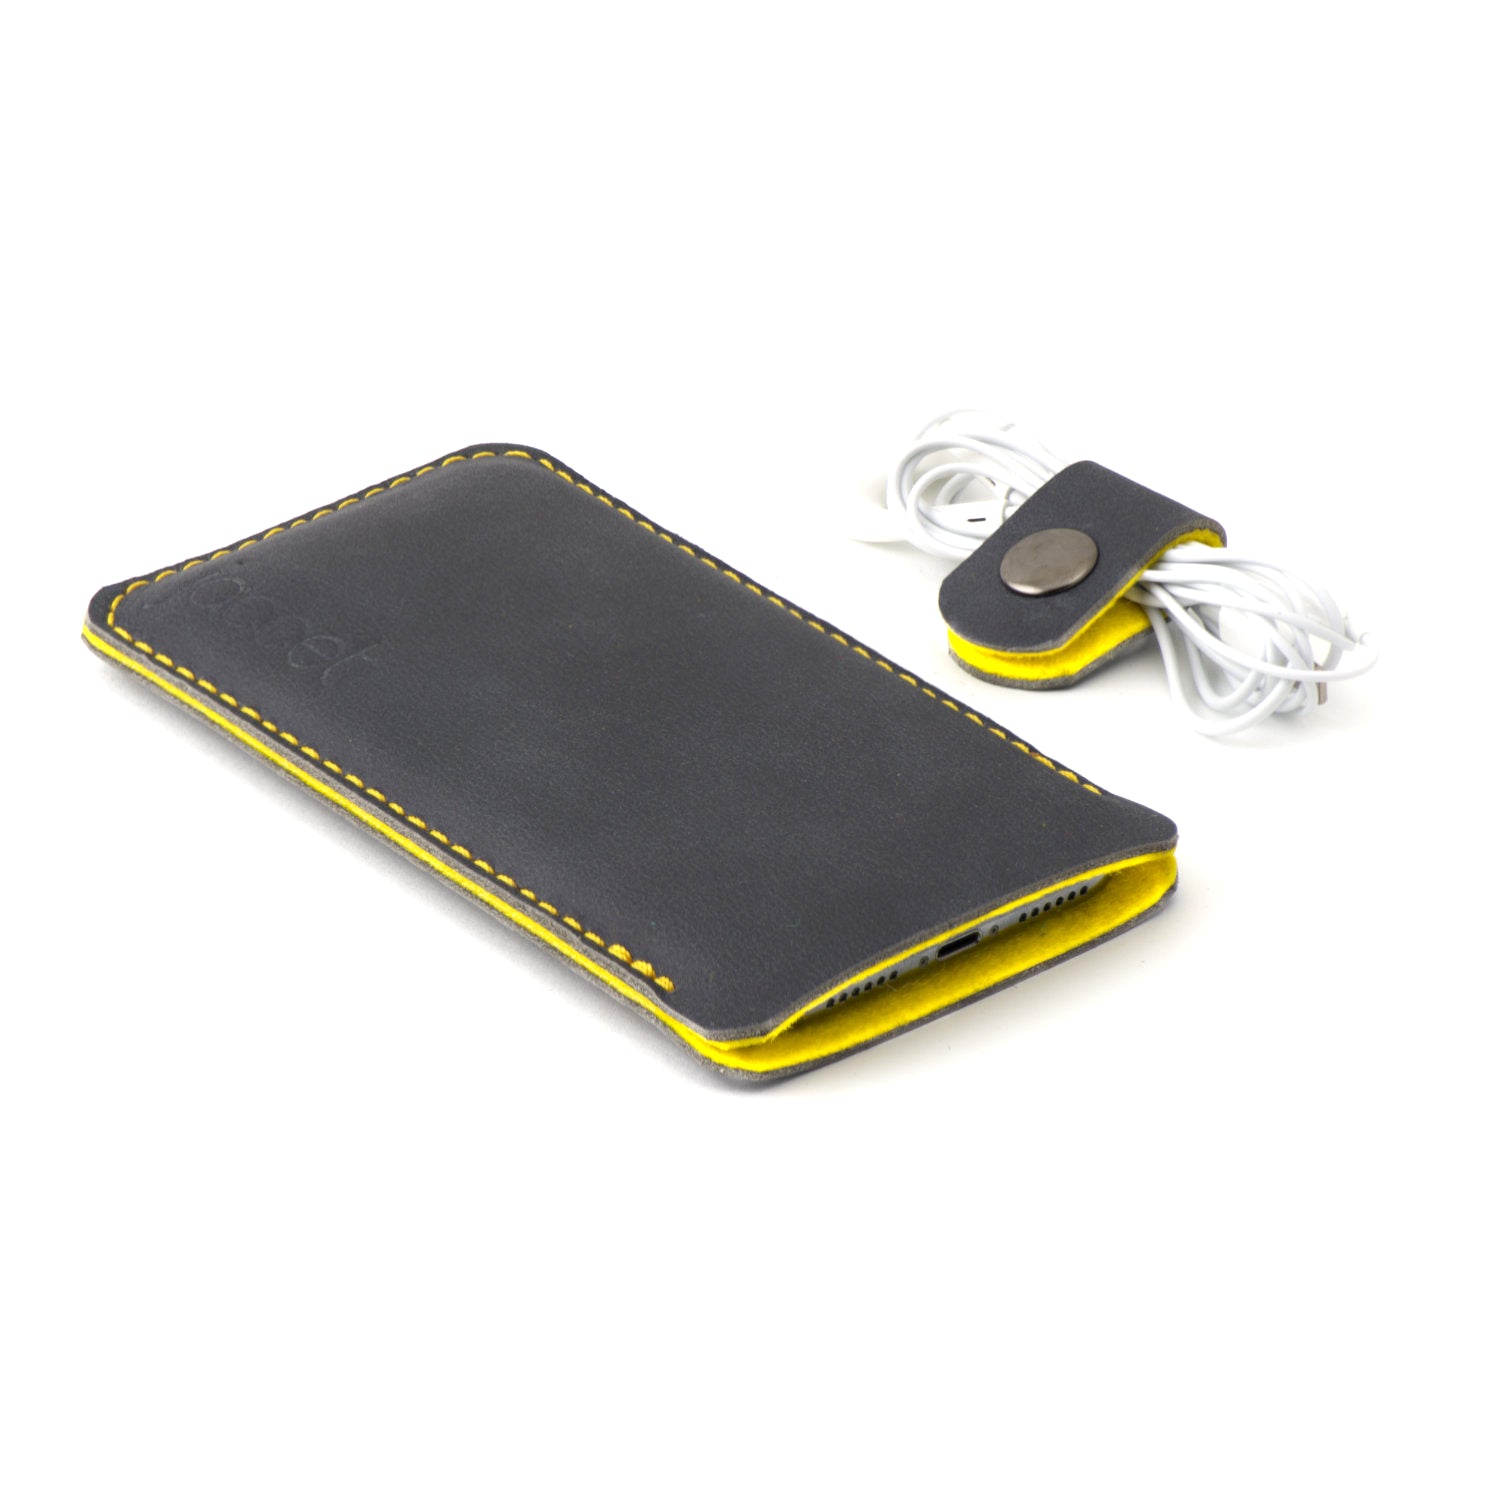 JACCET leather Xiaomi sleeve - anthracite/black leather with yellow wool felt. 100% Handmade